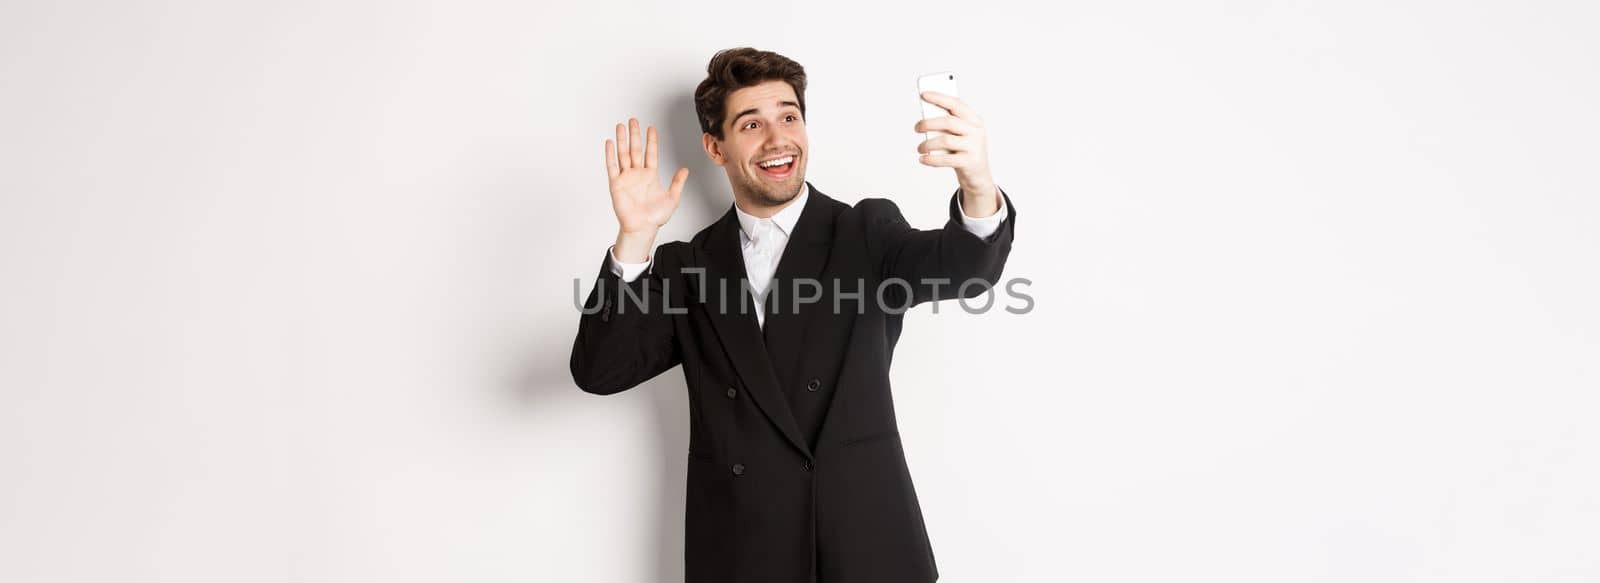 Image of handsome man in suit, having video call and waving hand at smartphone camera, recording video, greeting someone, standing against white background.